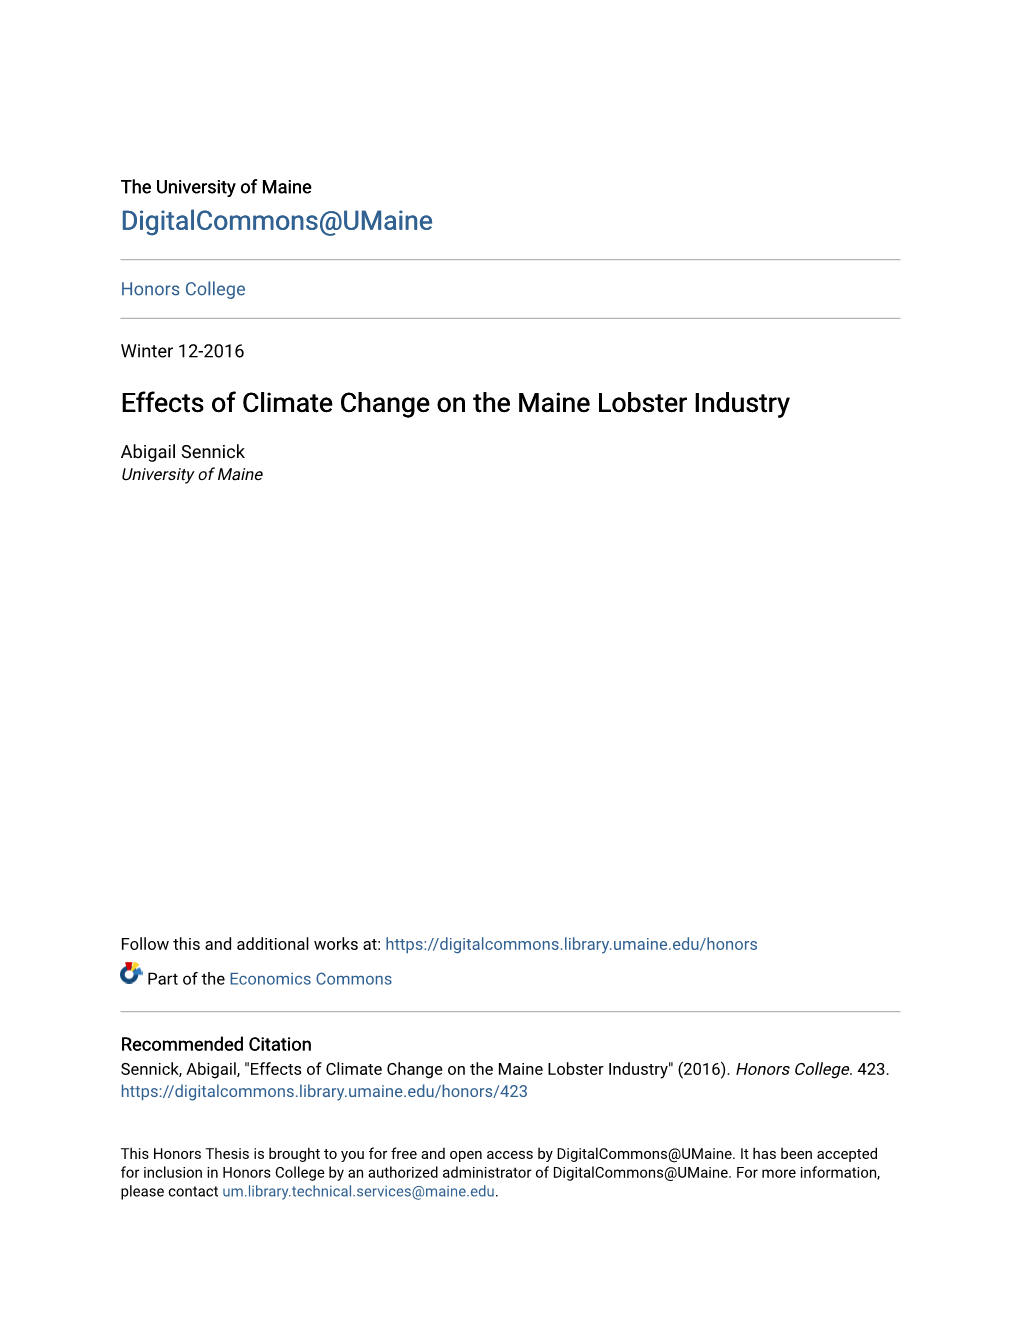 Effects of Climate Change on the Maine Lobster Industry